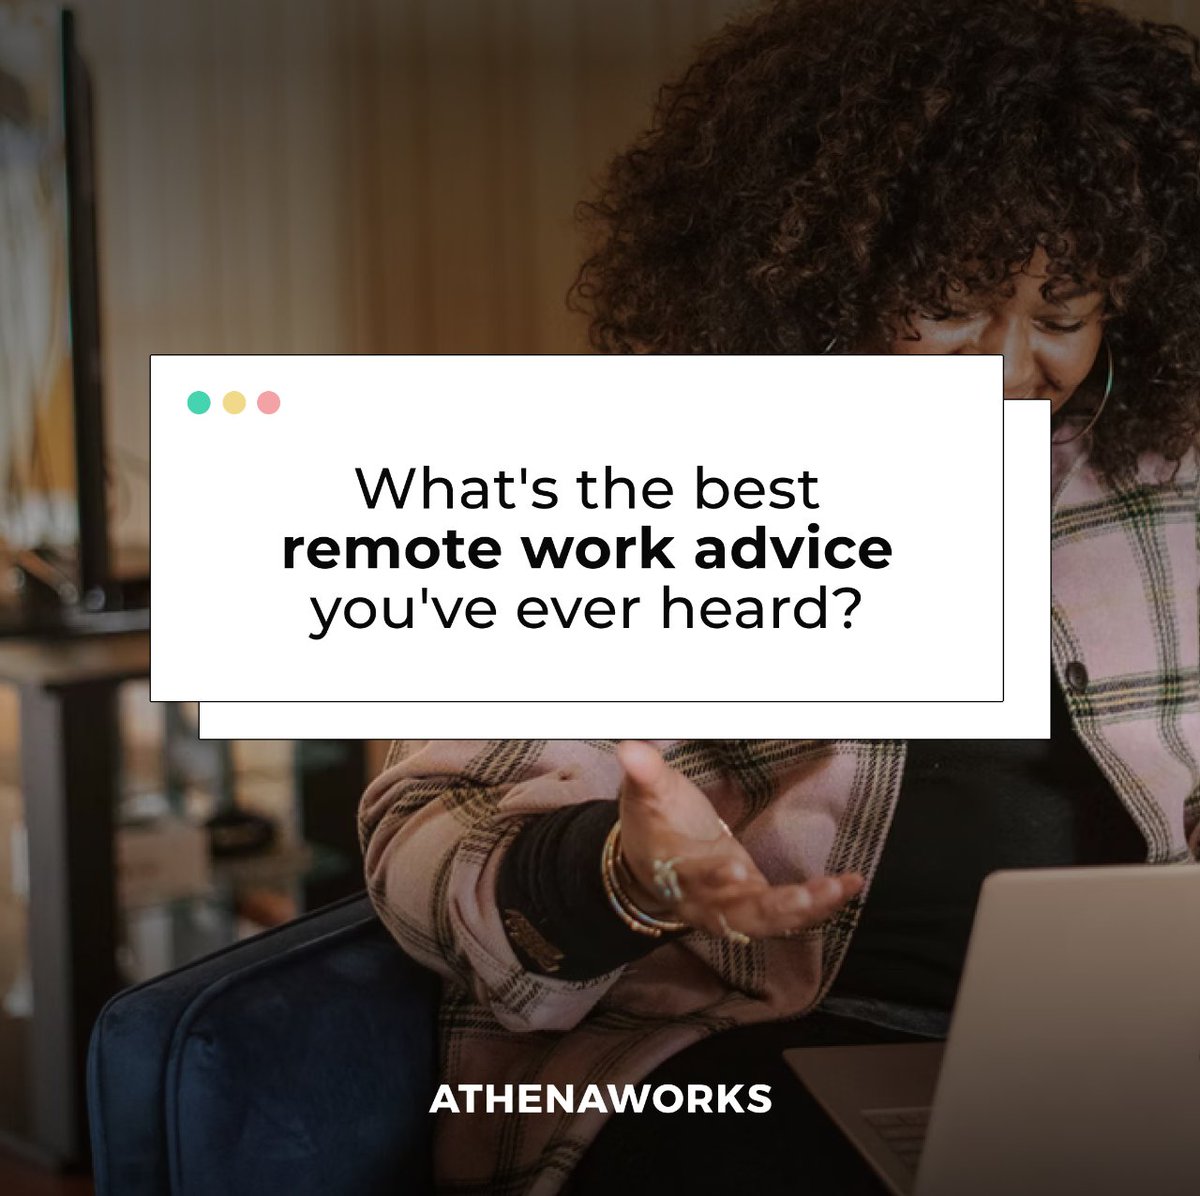 Let us know in the comments below!

#remotework #athenaworks #techjobs #womeninstem #womenintech #workadvice #remoteworktips #remoteworkbenefits